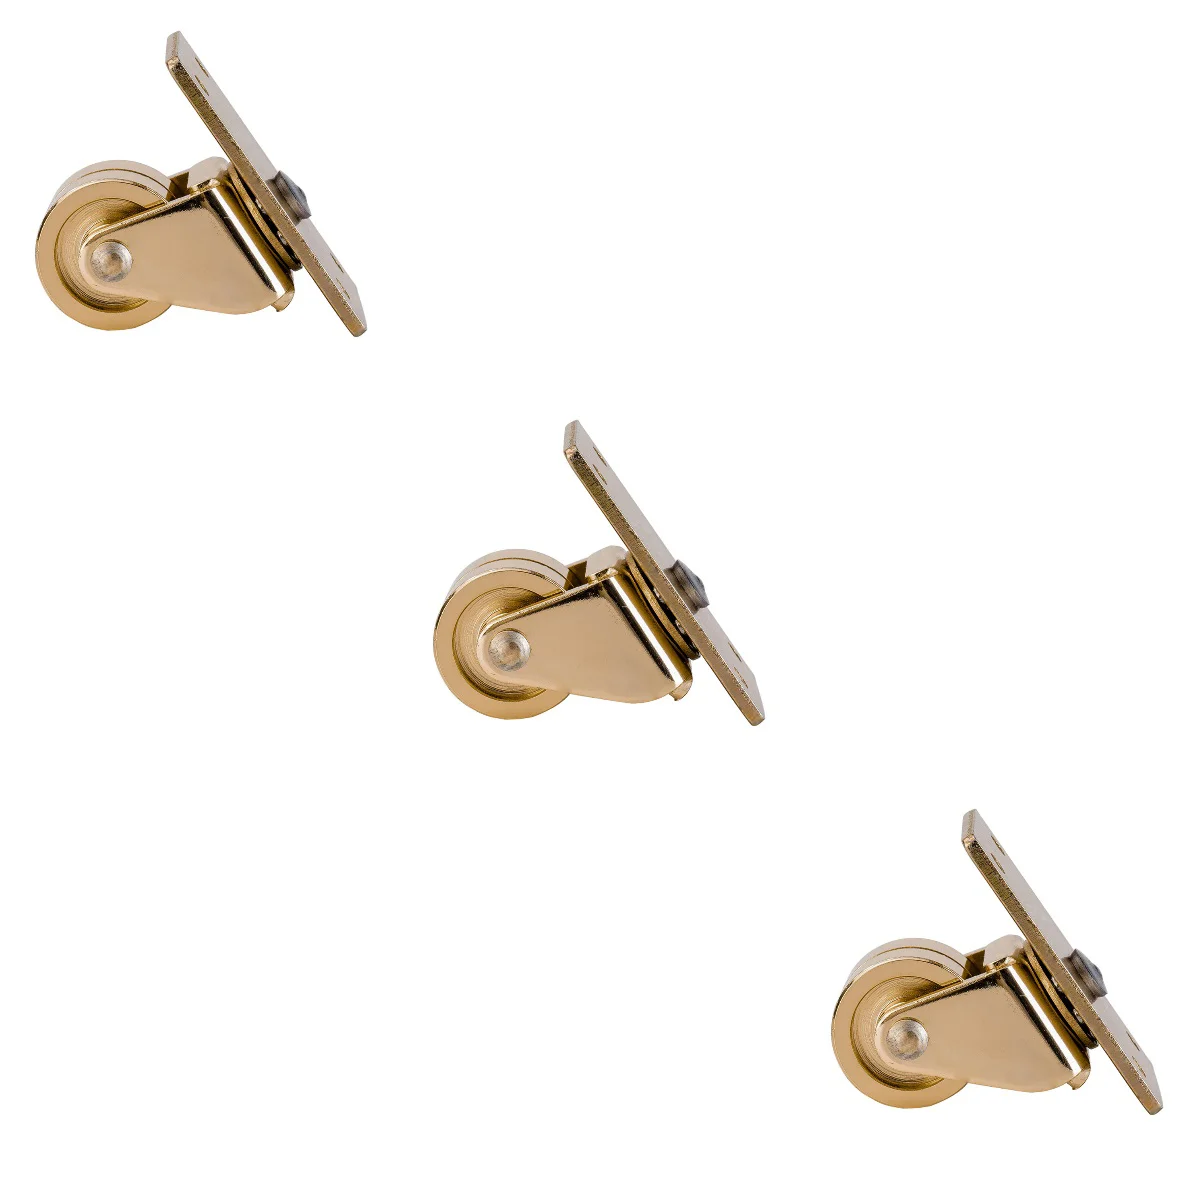 

Piano Wheel Caster Accessory Metal Wheels Upright Furniture Casters Moving Mobileswivel Protectors Floor Brass Duty Heavy Supply